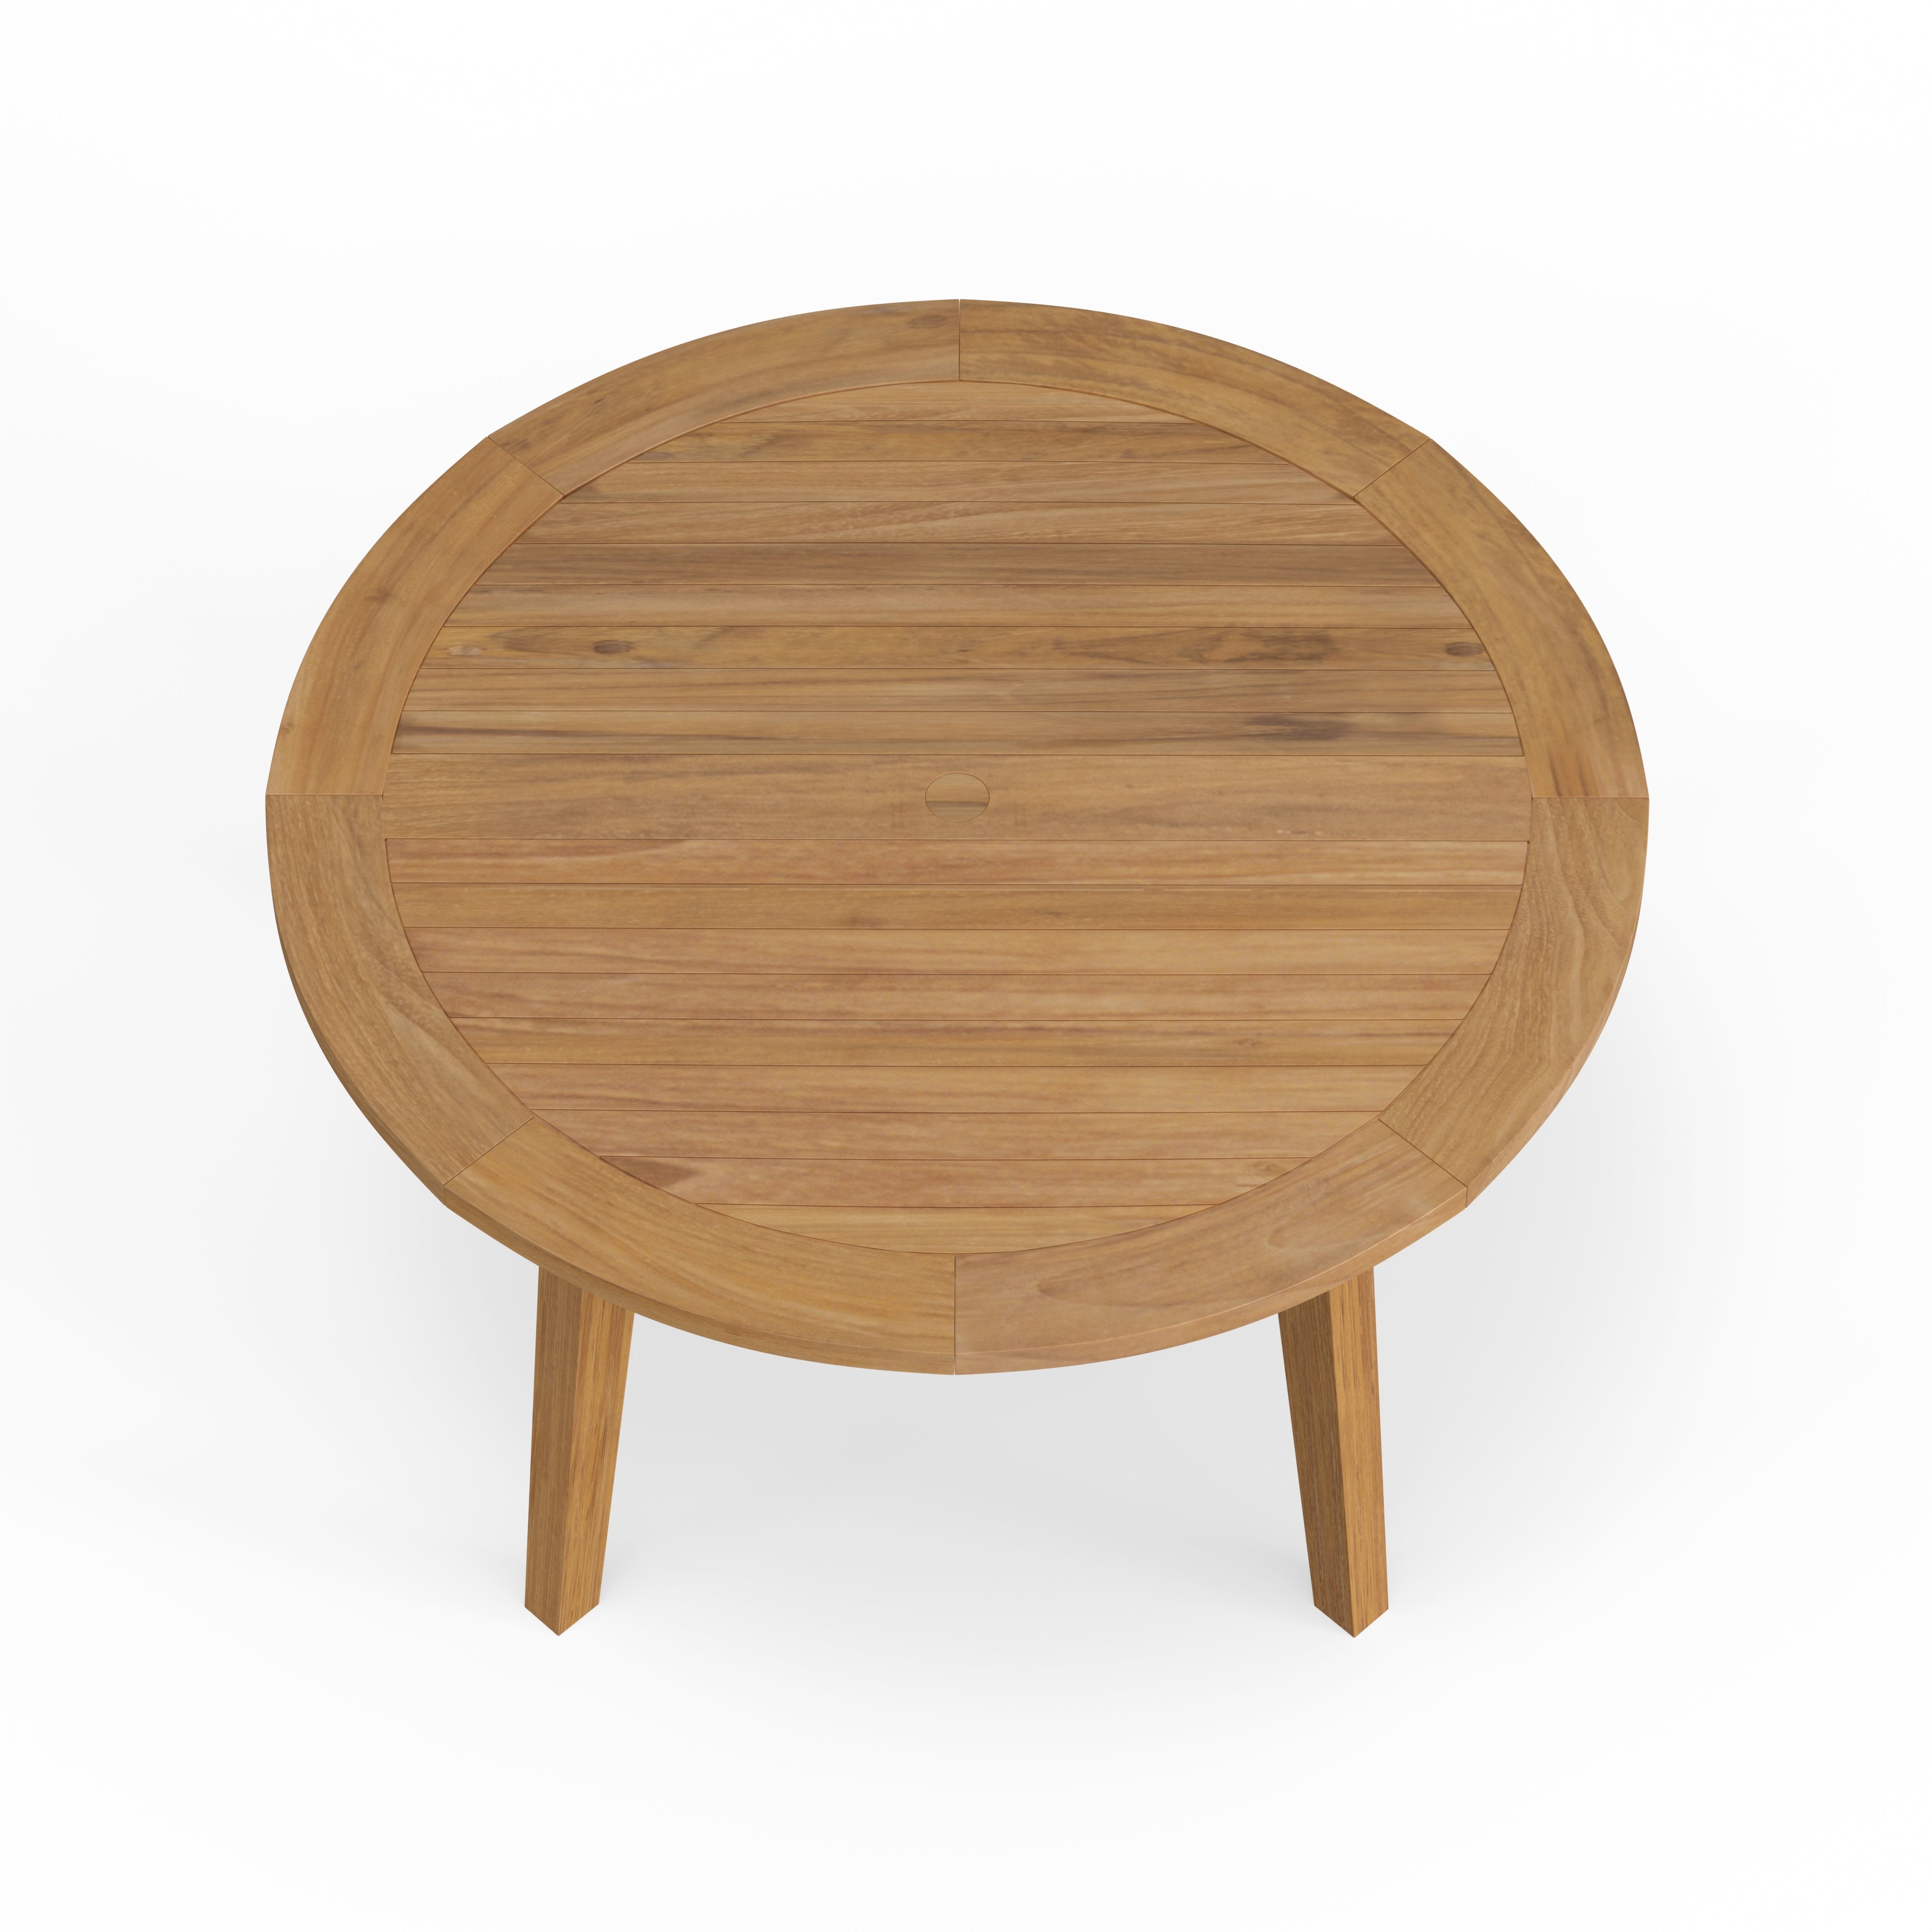 Most Durable Outdoor Round Teak Dining Table